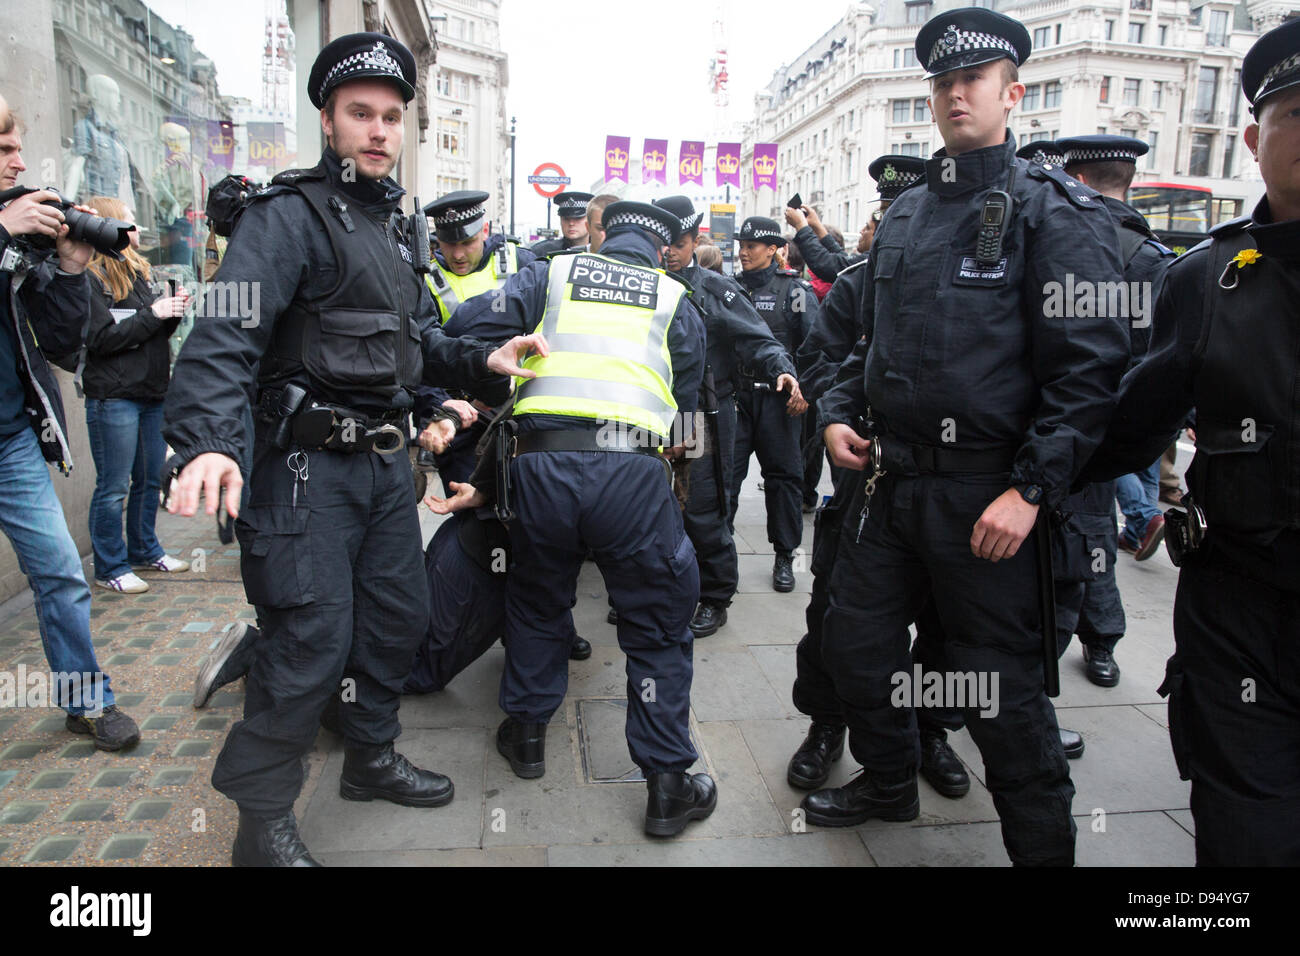 London, UK. 11th June 2013. Anti G8 protesters in scuffles with police on Regent Street. Credit:  Lydia Pagoni/Alamy Live News Stock Photo